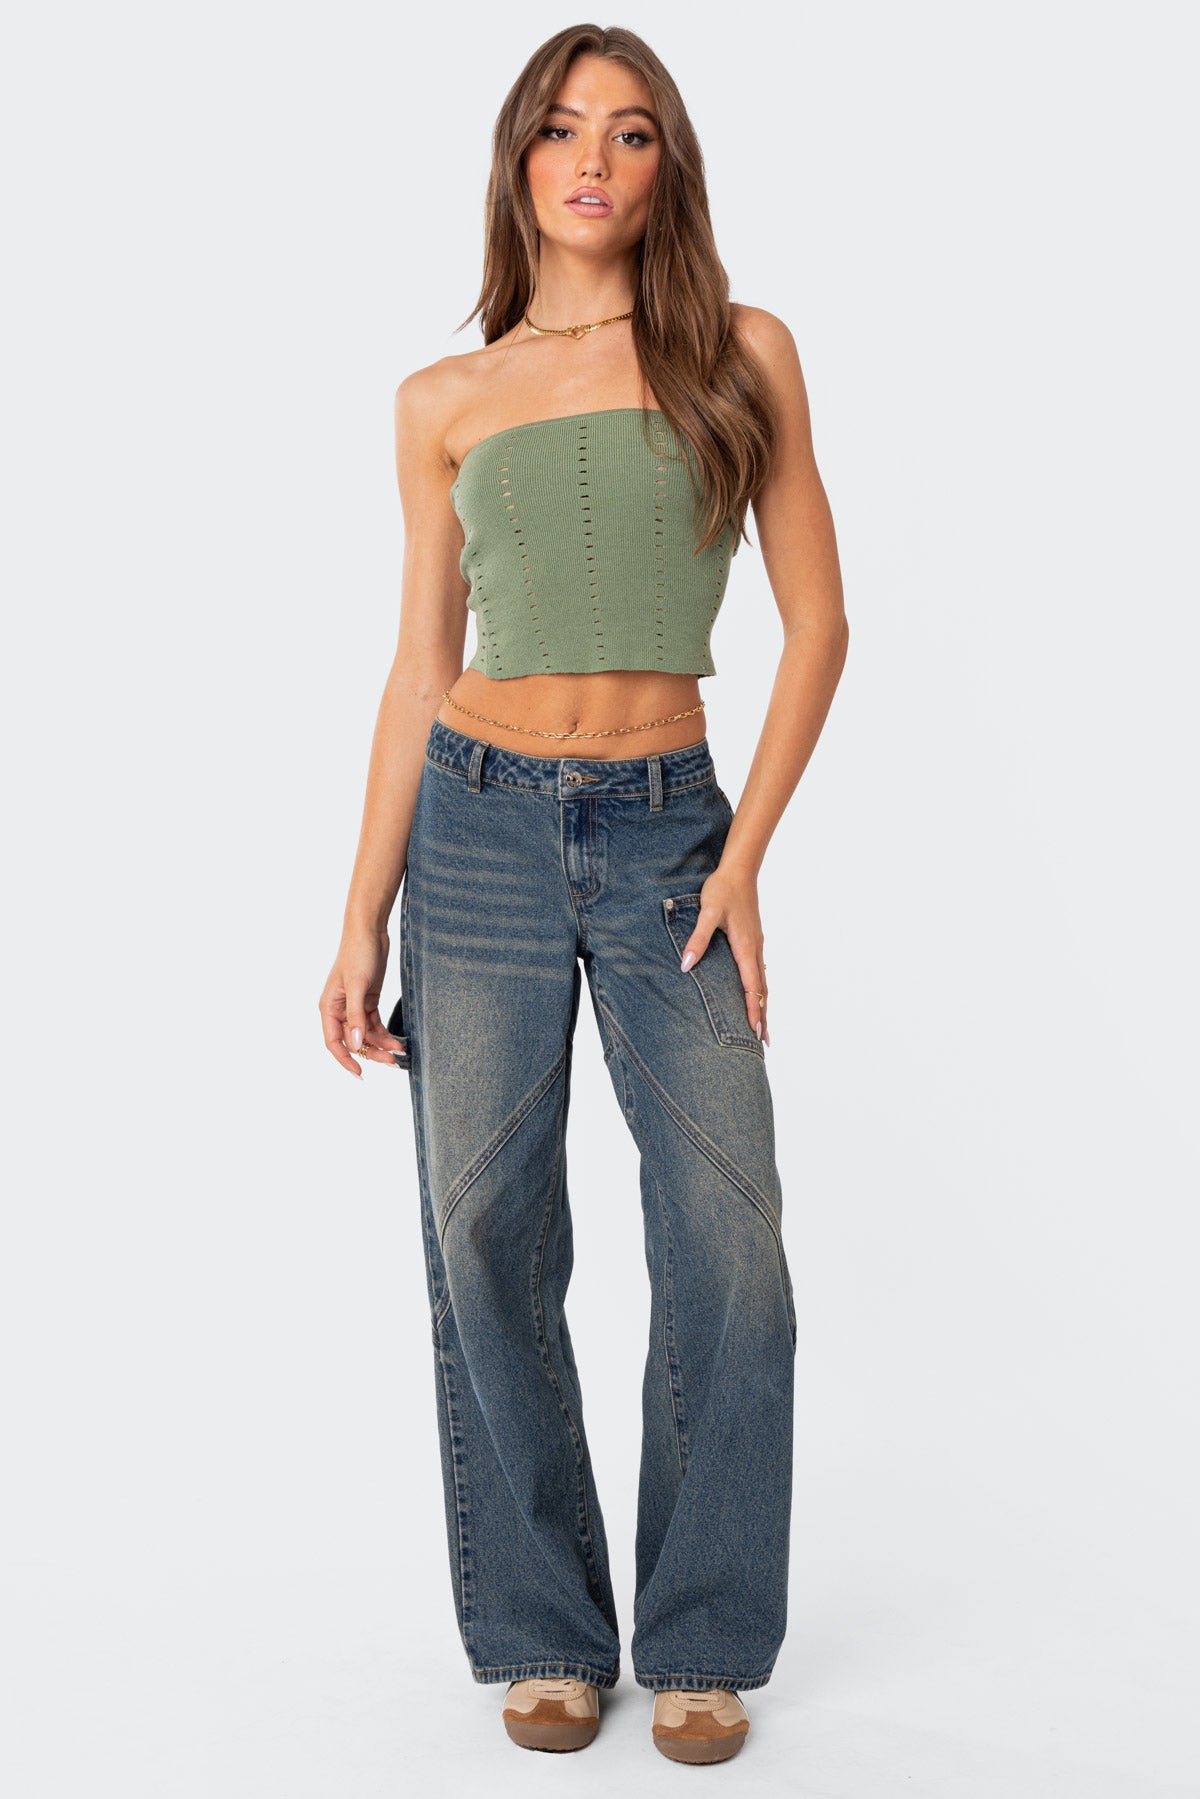 Reef Knit Tube Top